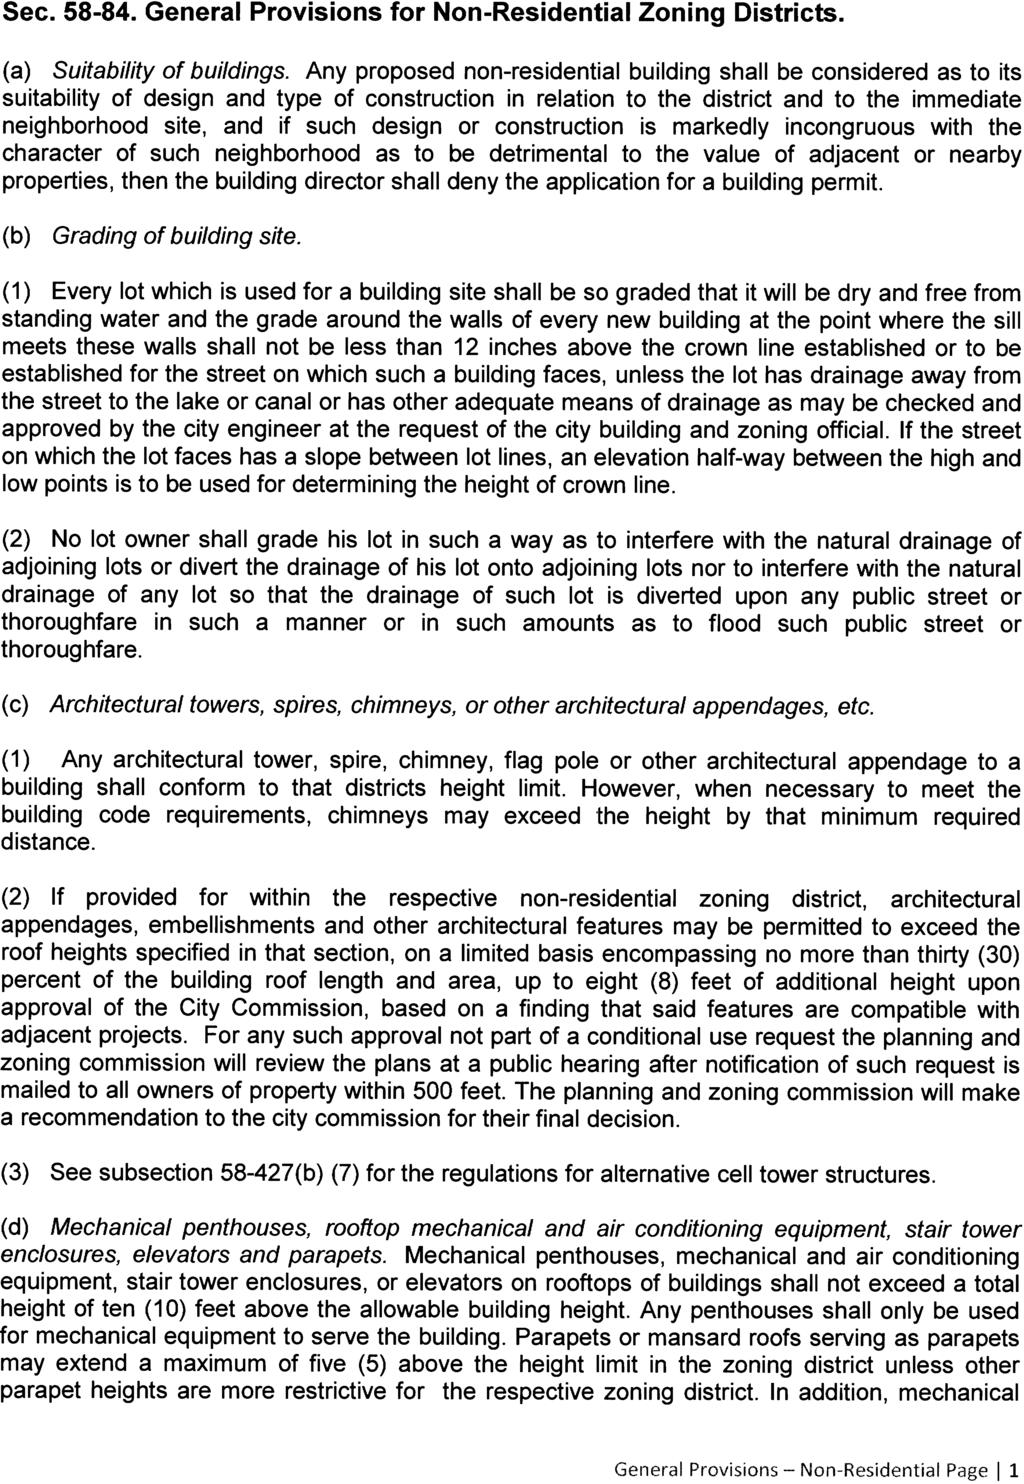 Sec. 58-84. General Provisions for Non-Residential Zoning Districts. (a) Suitability of buildings.